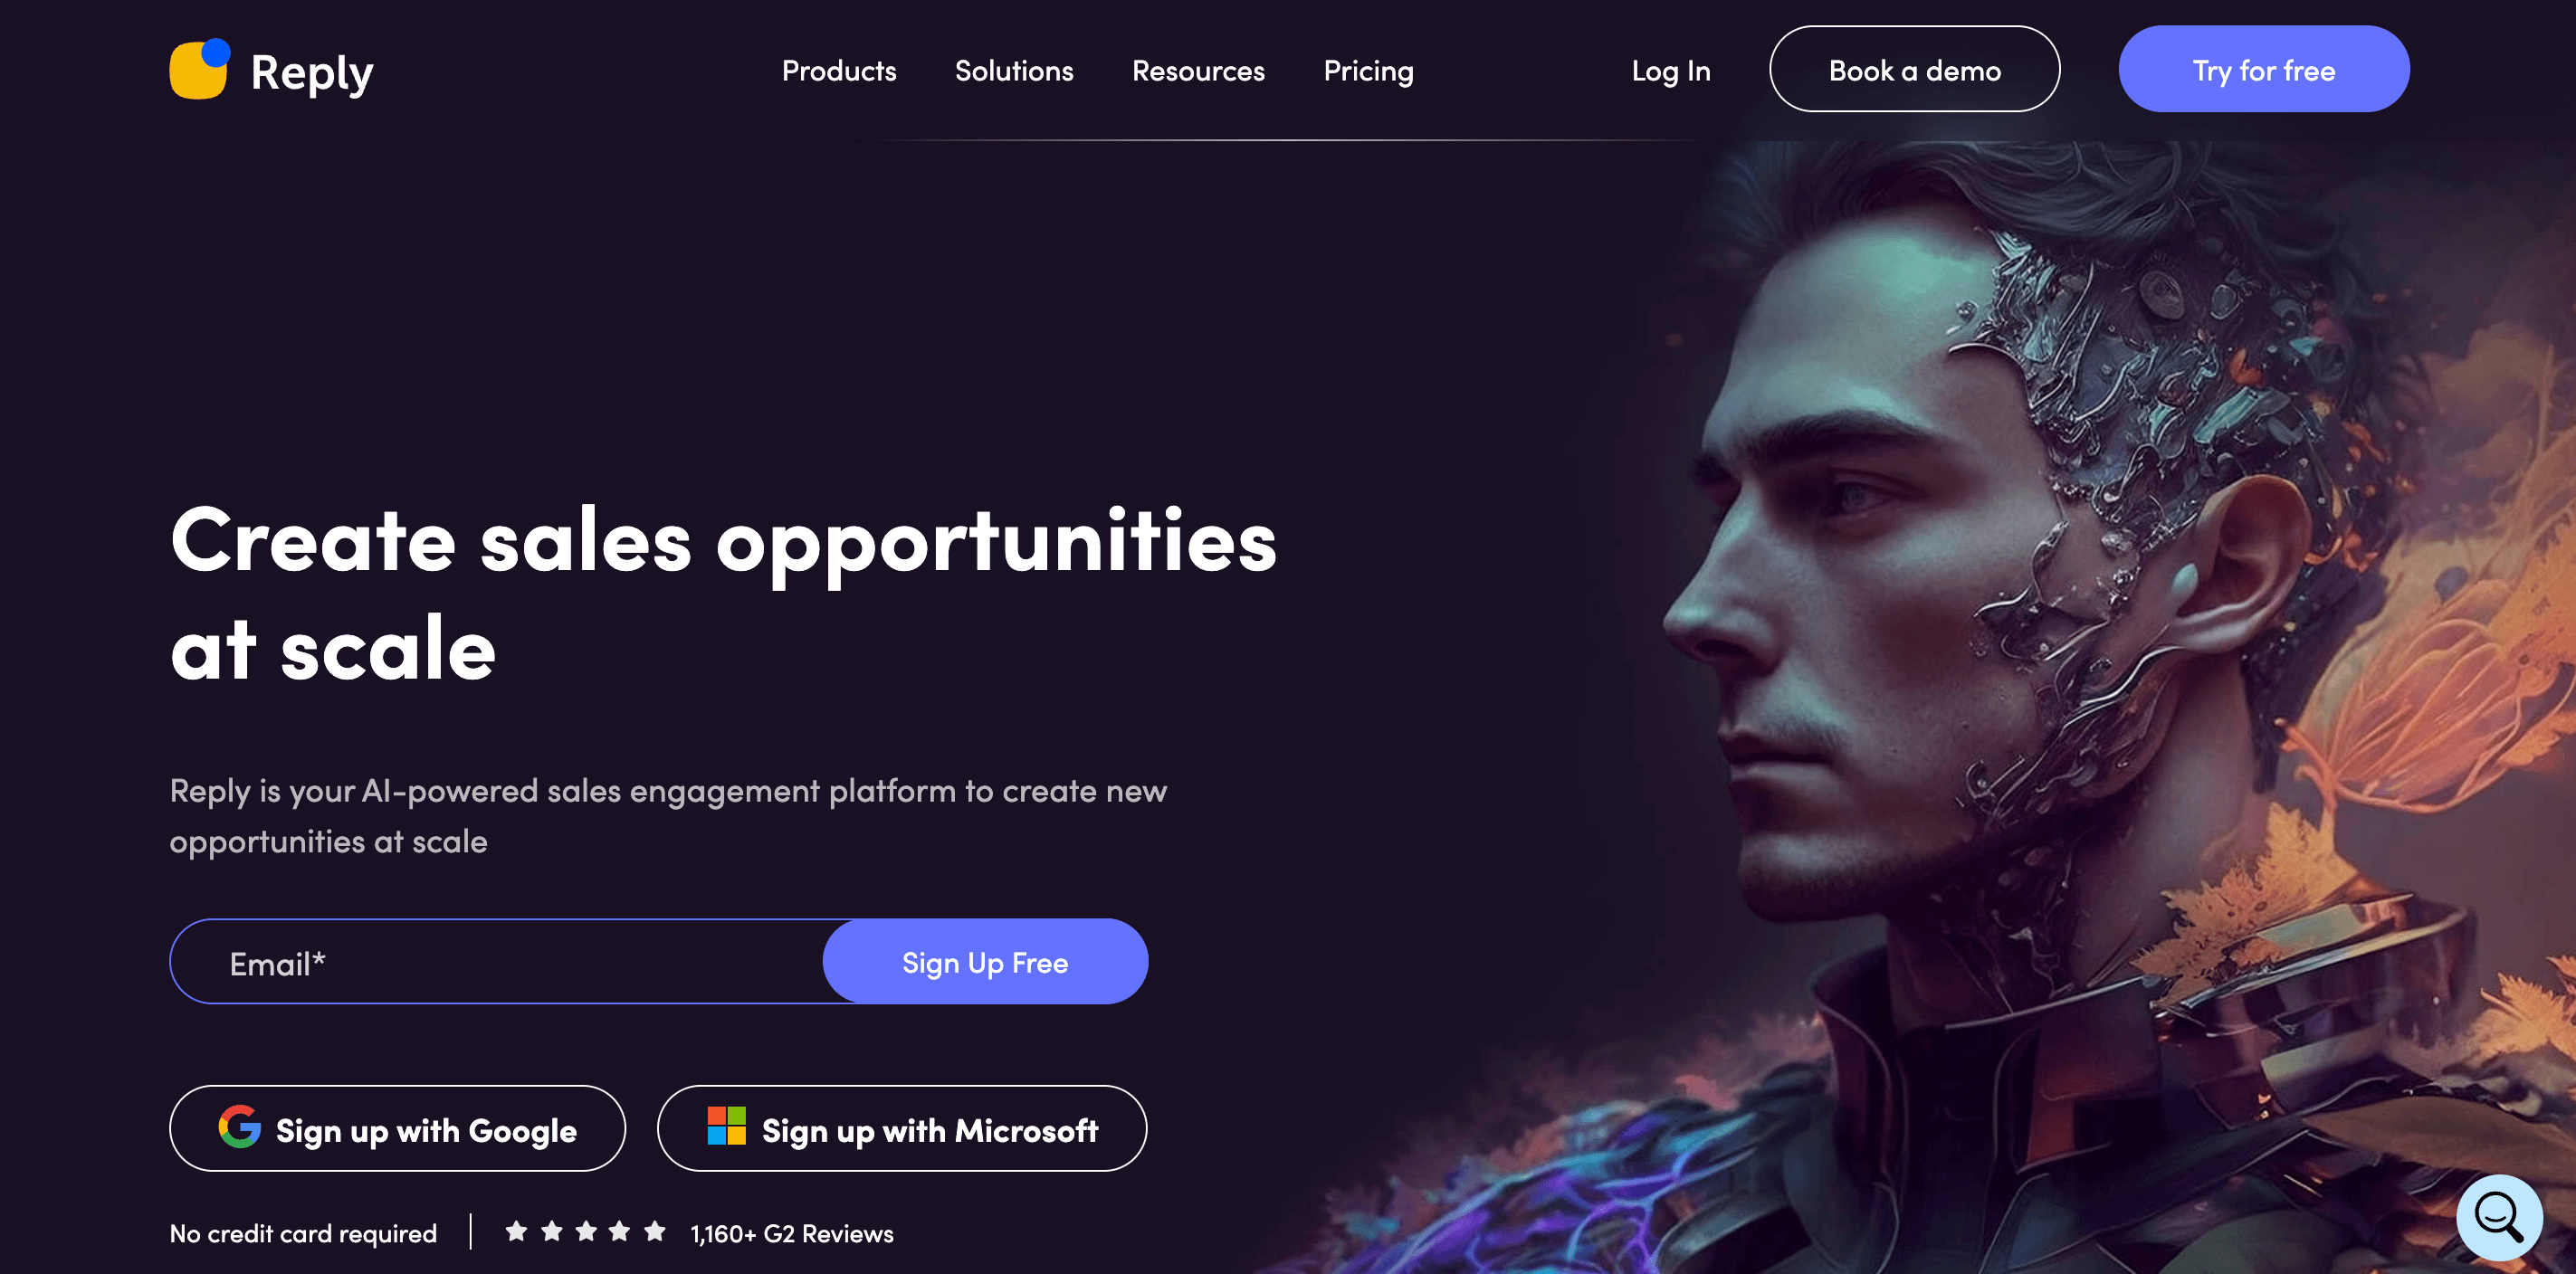 Reply’s homepage.